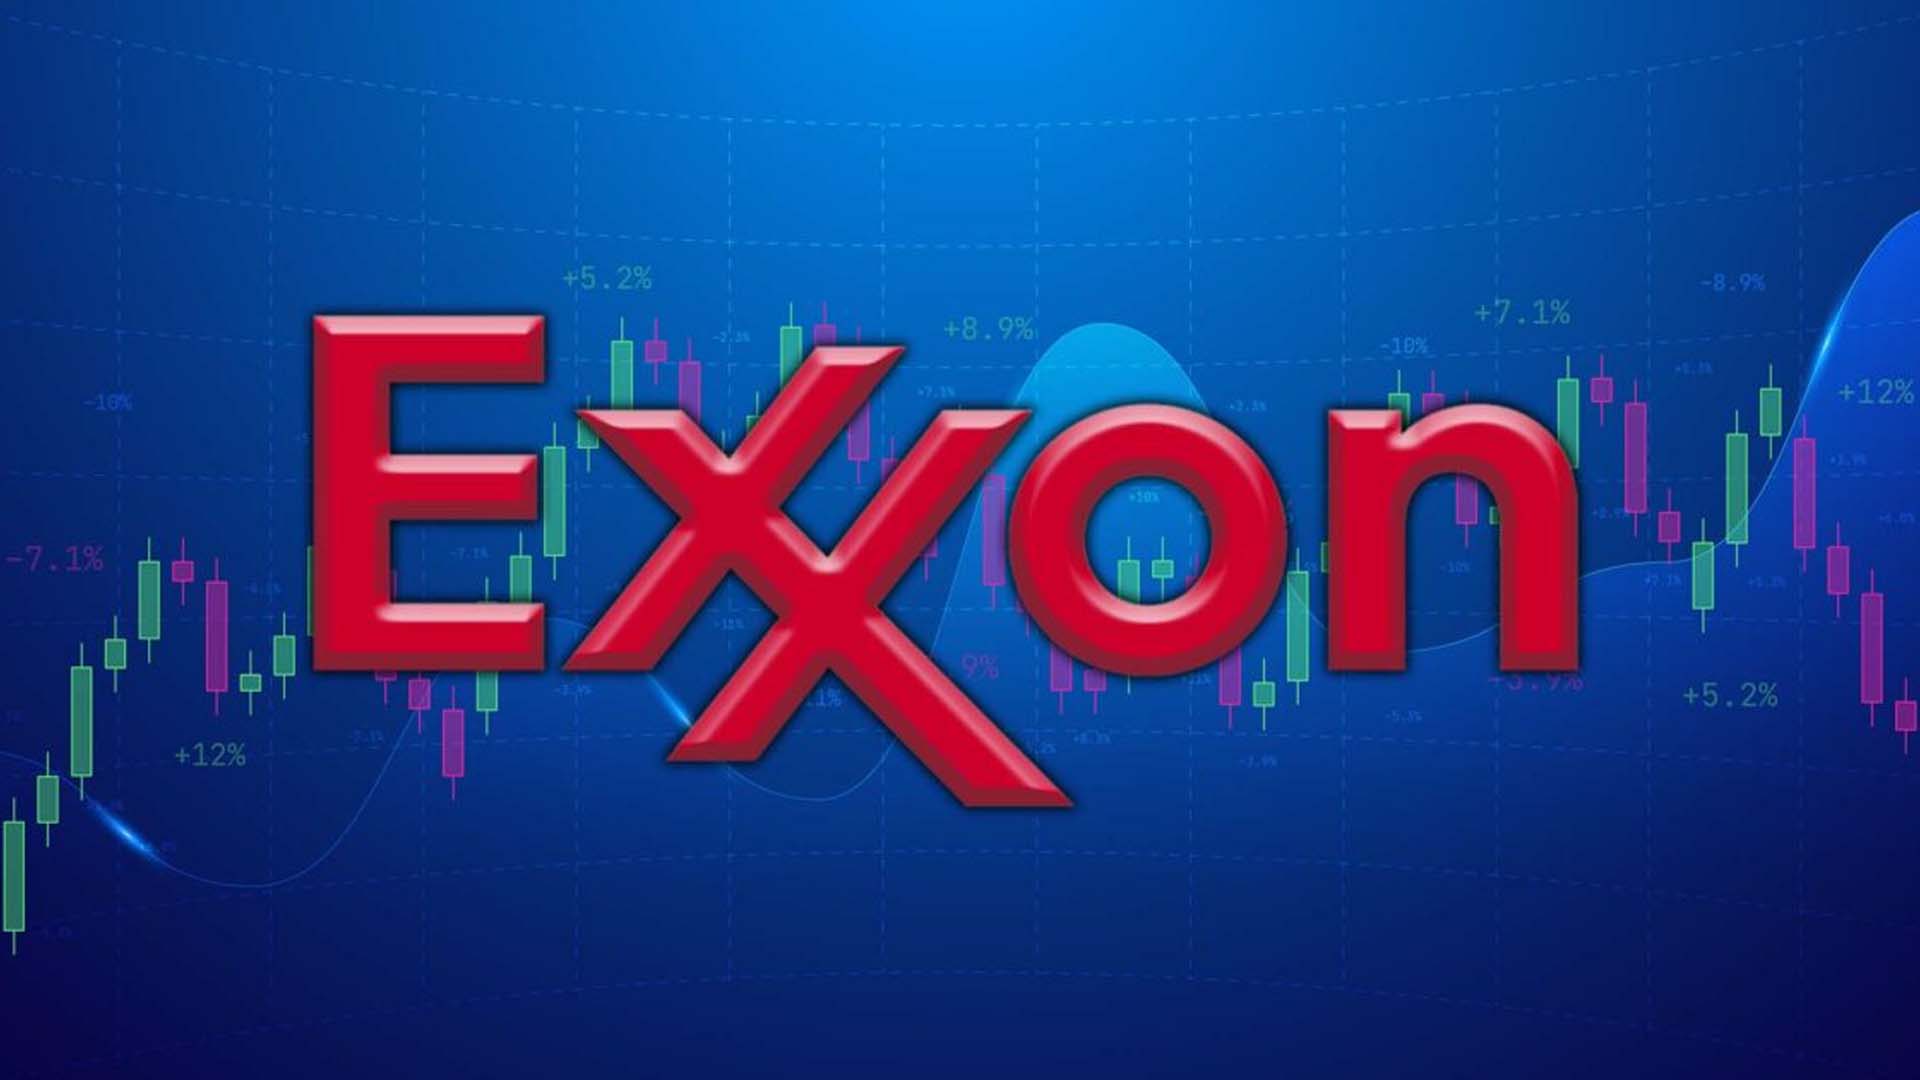 XOM Stock Price Prediction: Know about this Deliberate Selling Pressure over Exxon Mobil Corp Stock?